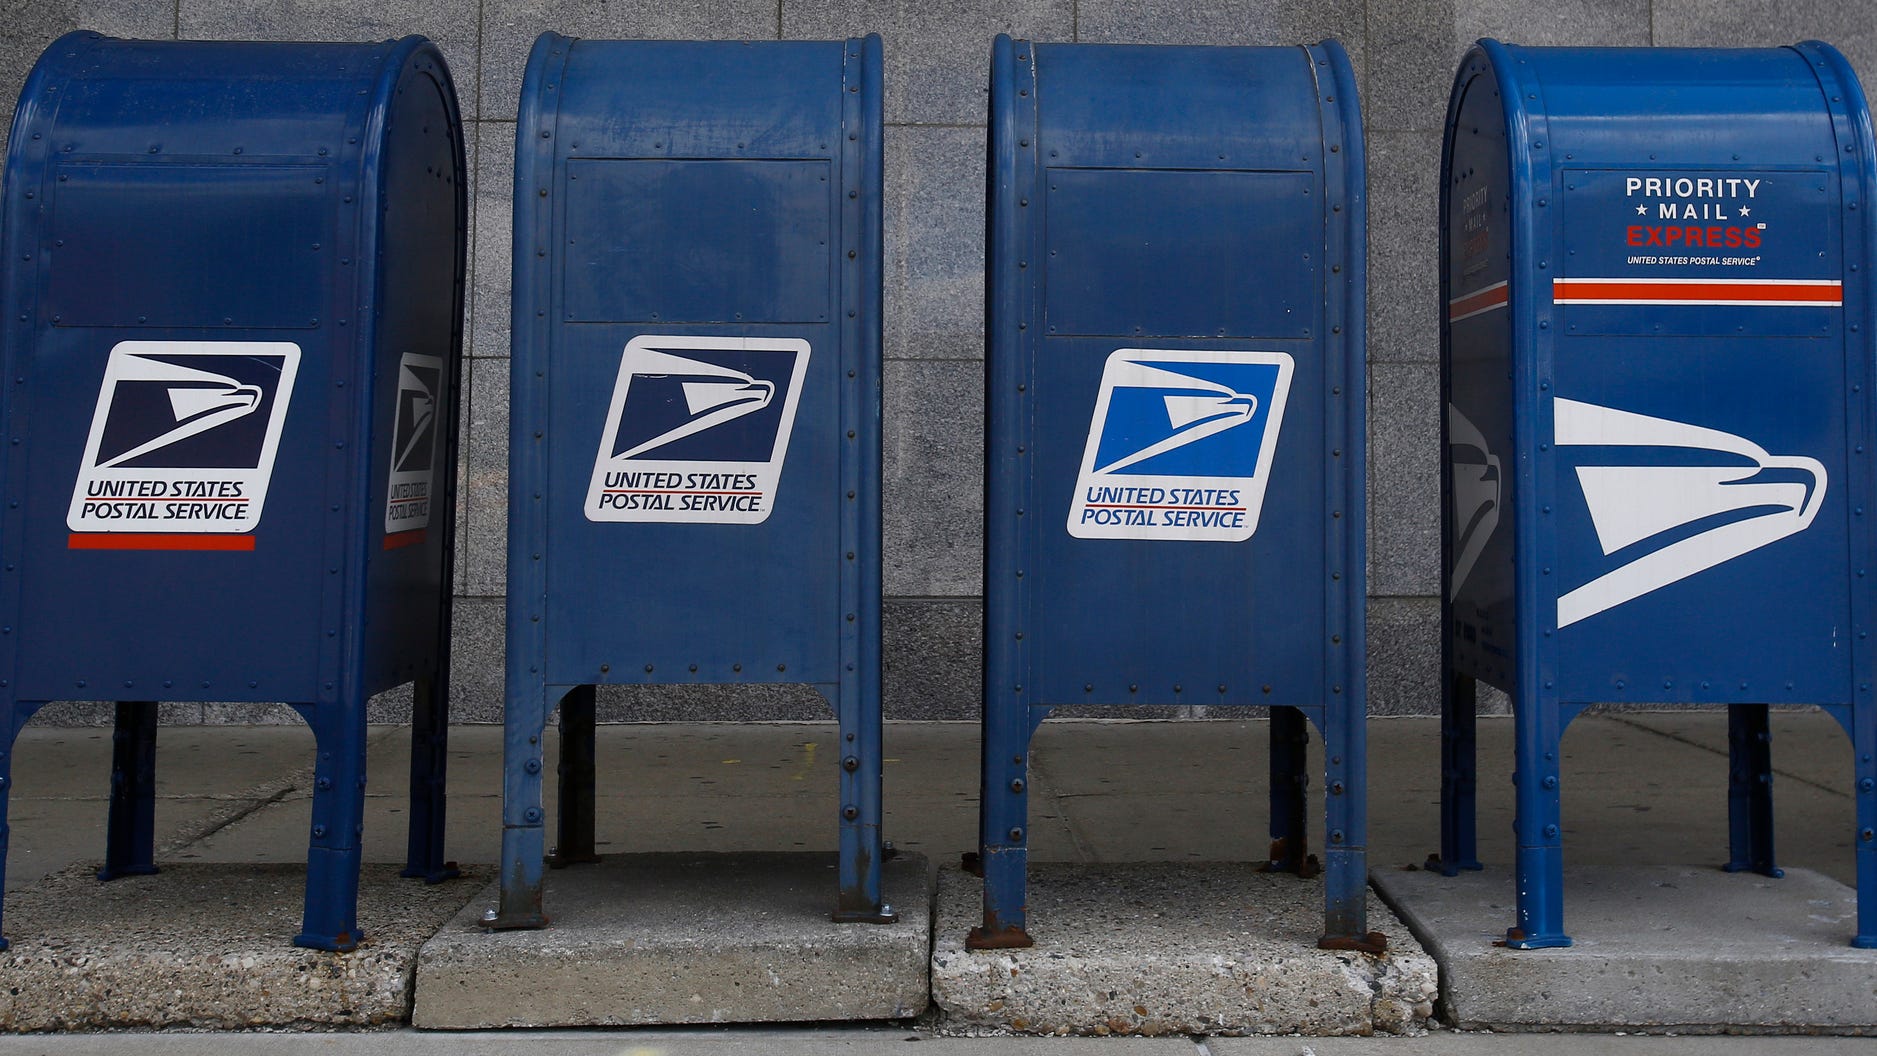 Fact check: USPS mailbox locks used as security measures during events